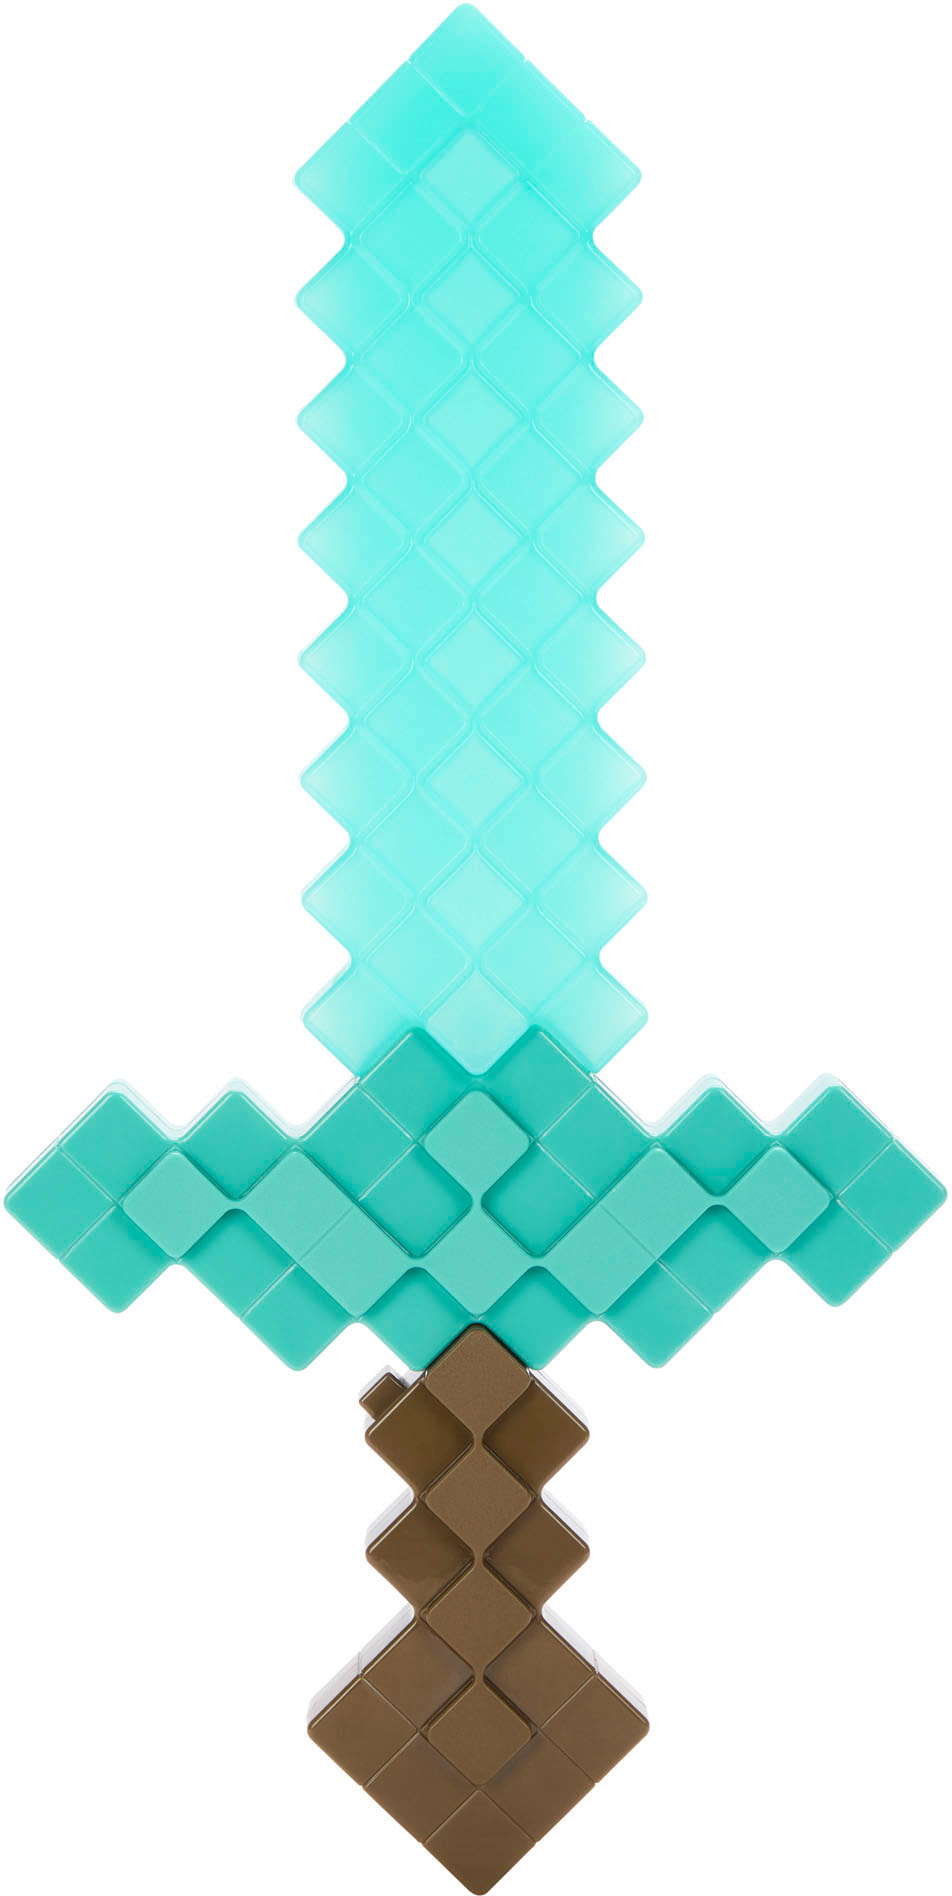 How to make an Enchanted Diamond Sword in Minecraft